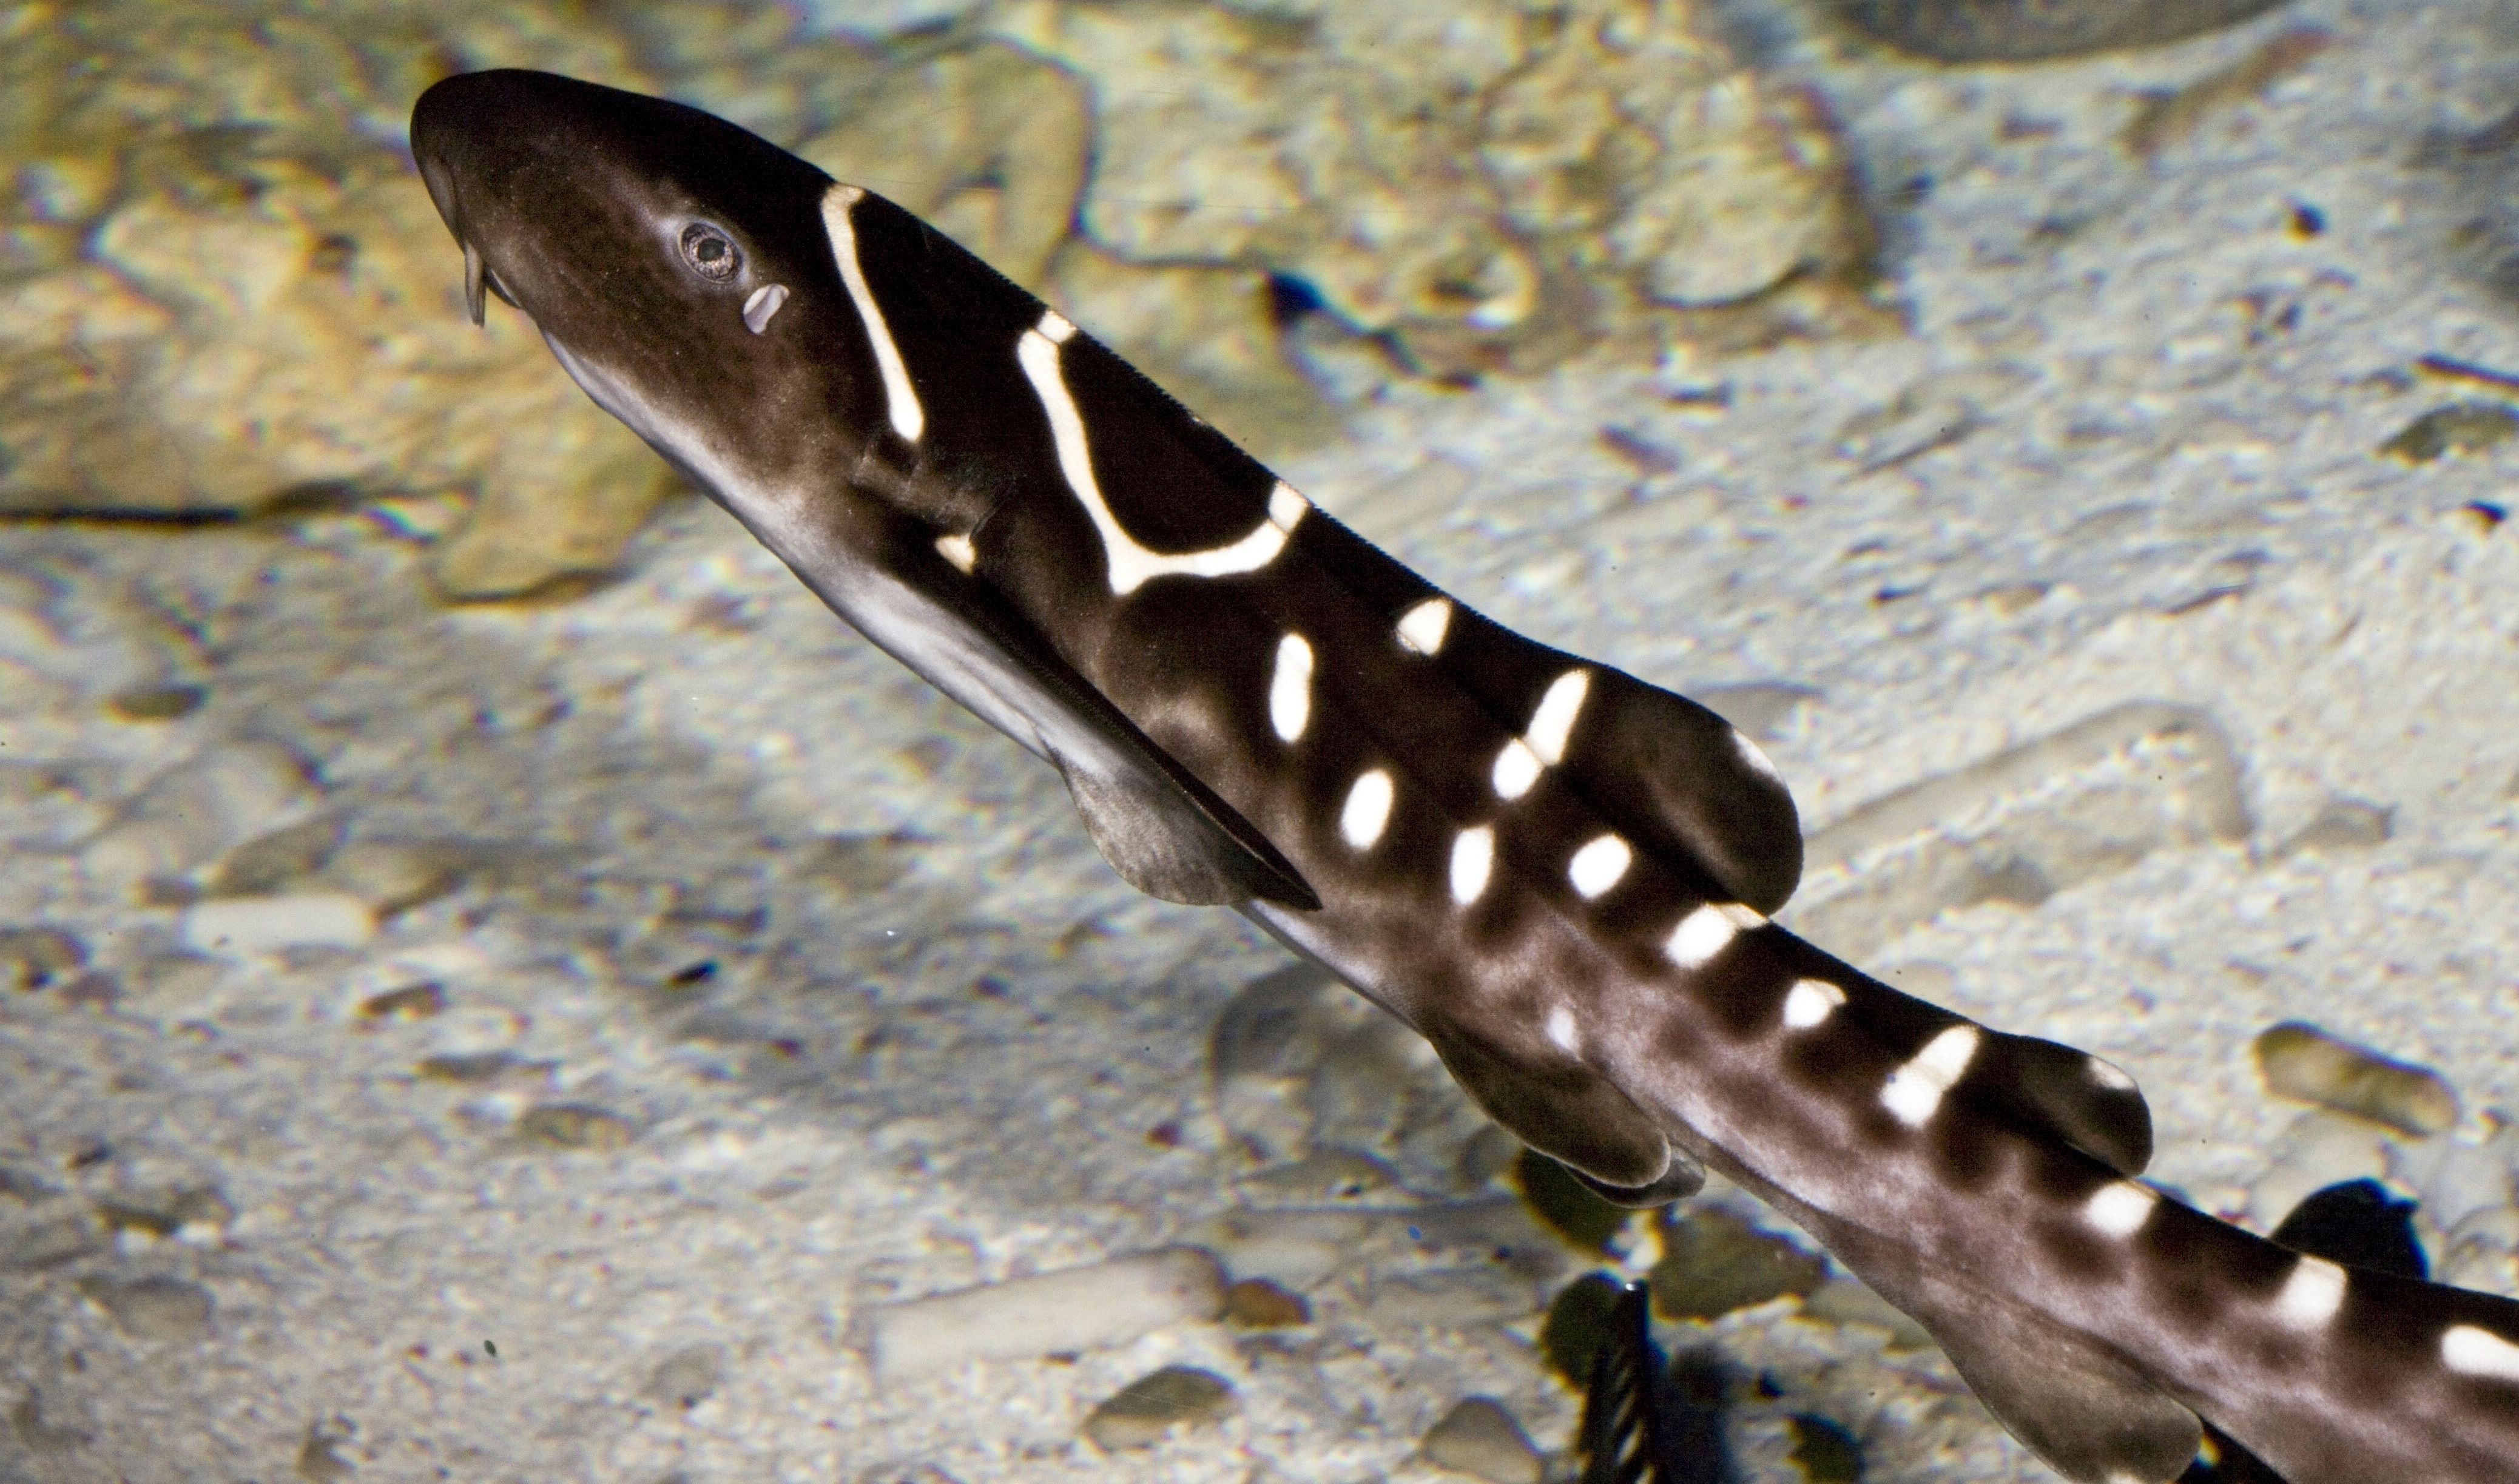 A young juvenile zebra shark (Stegostoma fasciatum)&nbsp;is seen at the ReefHQ Aquarium, in Townsville, Queensland, Australia, where Leonie also resides.